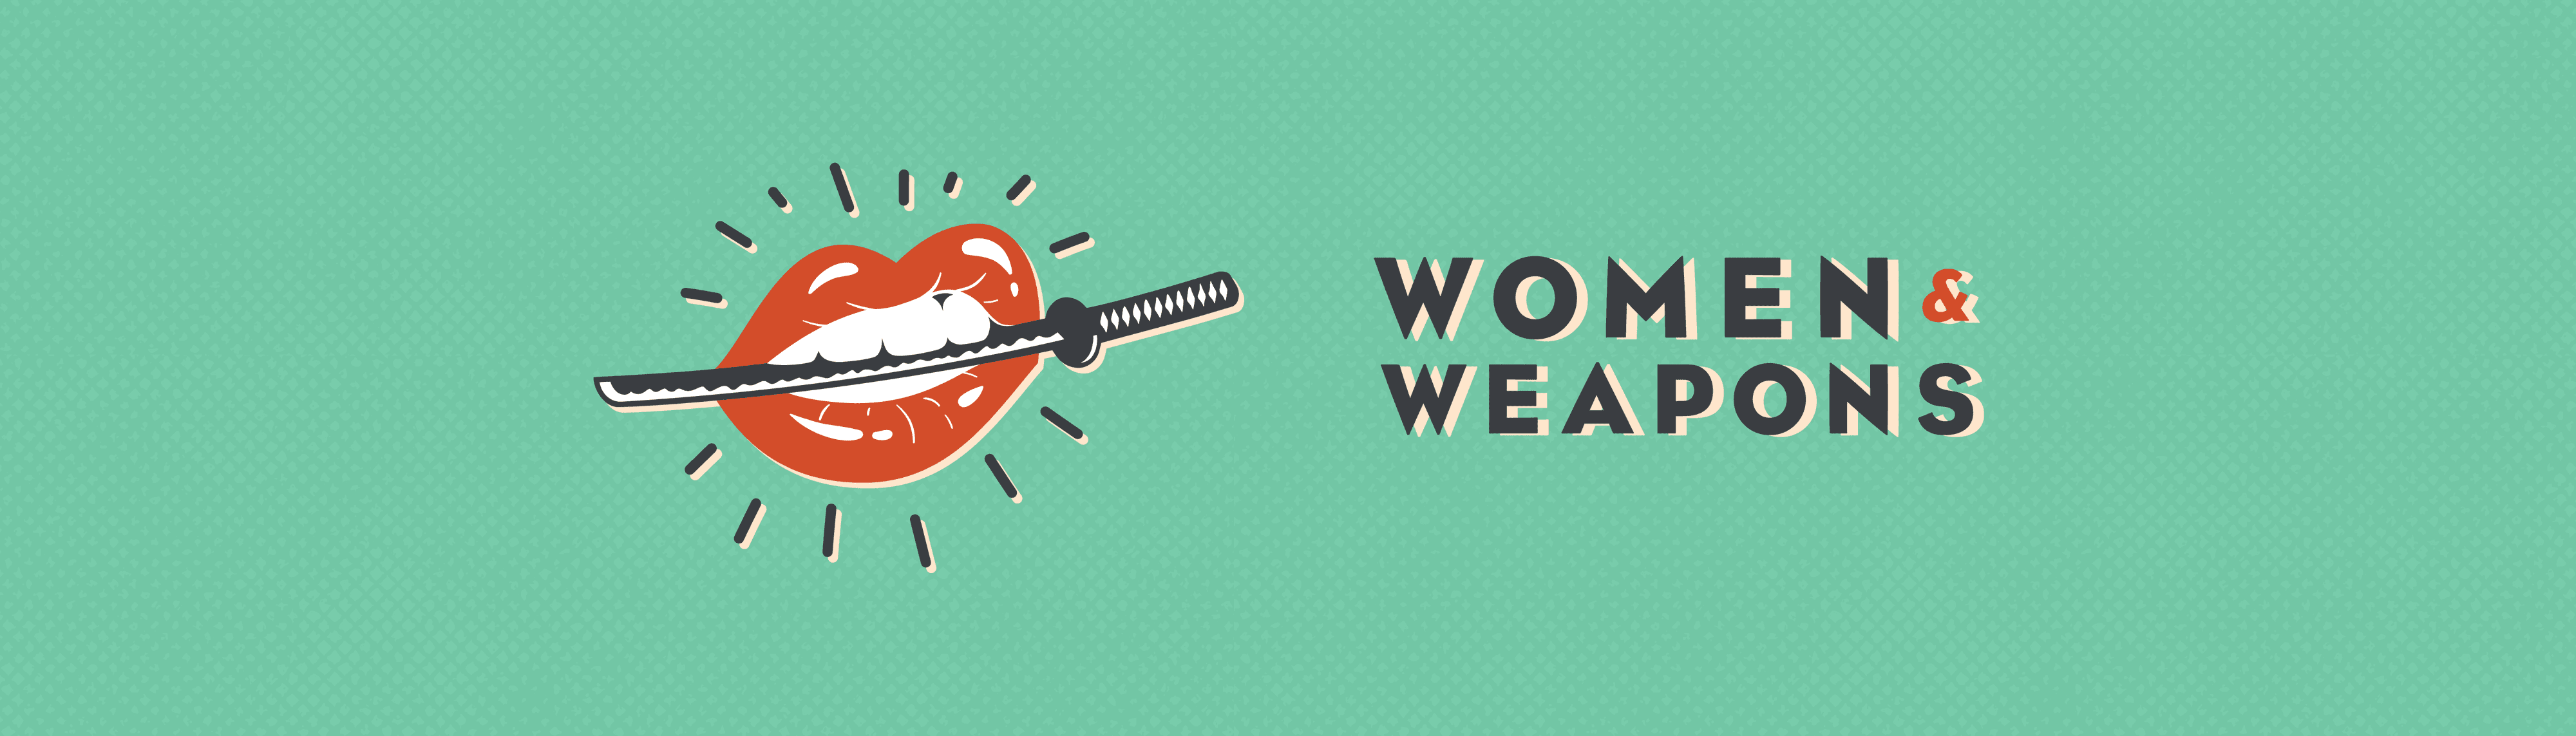 Women and Weapons